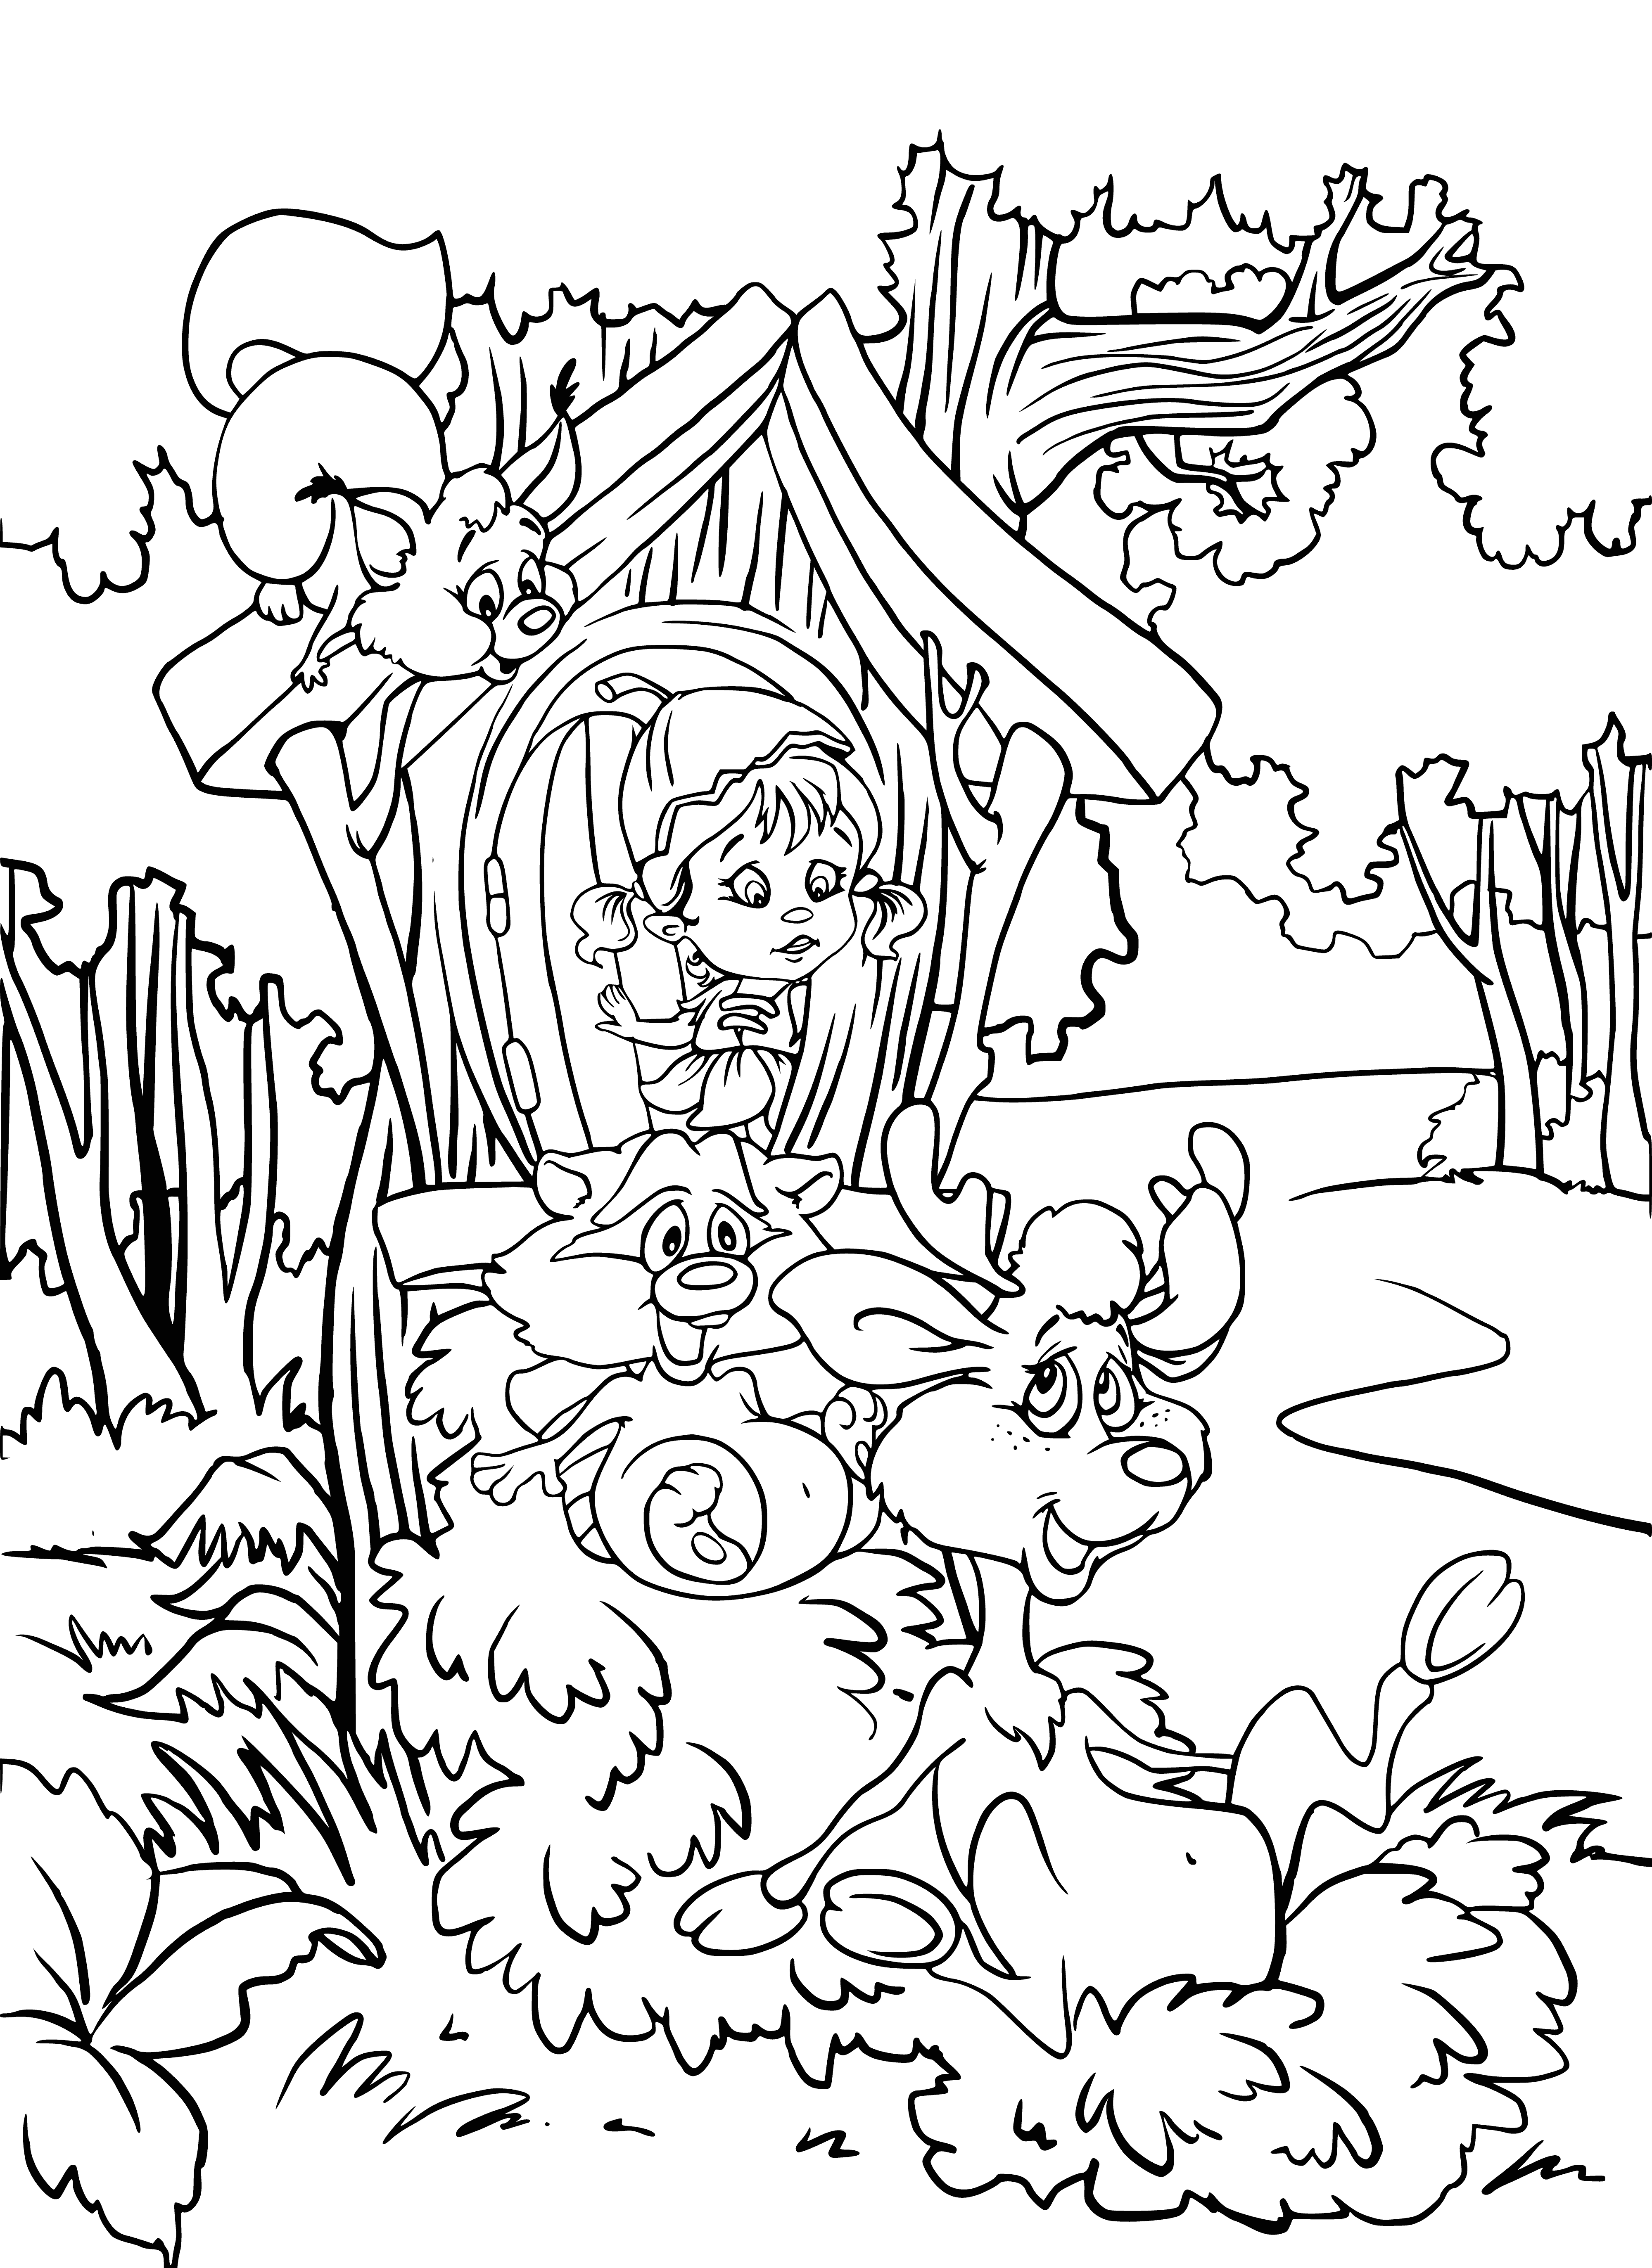 Downhill coloring page